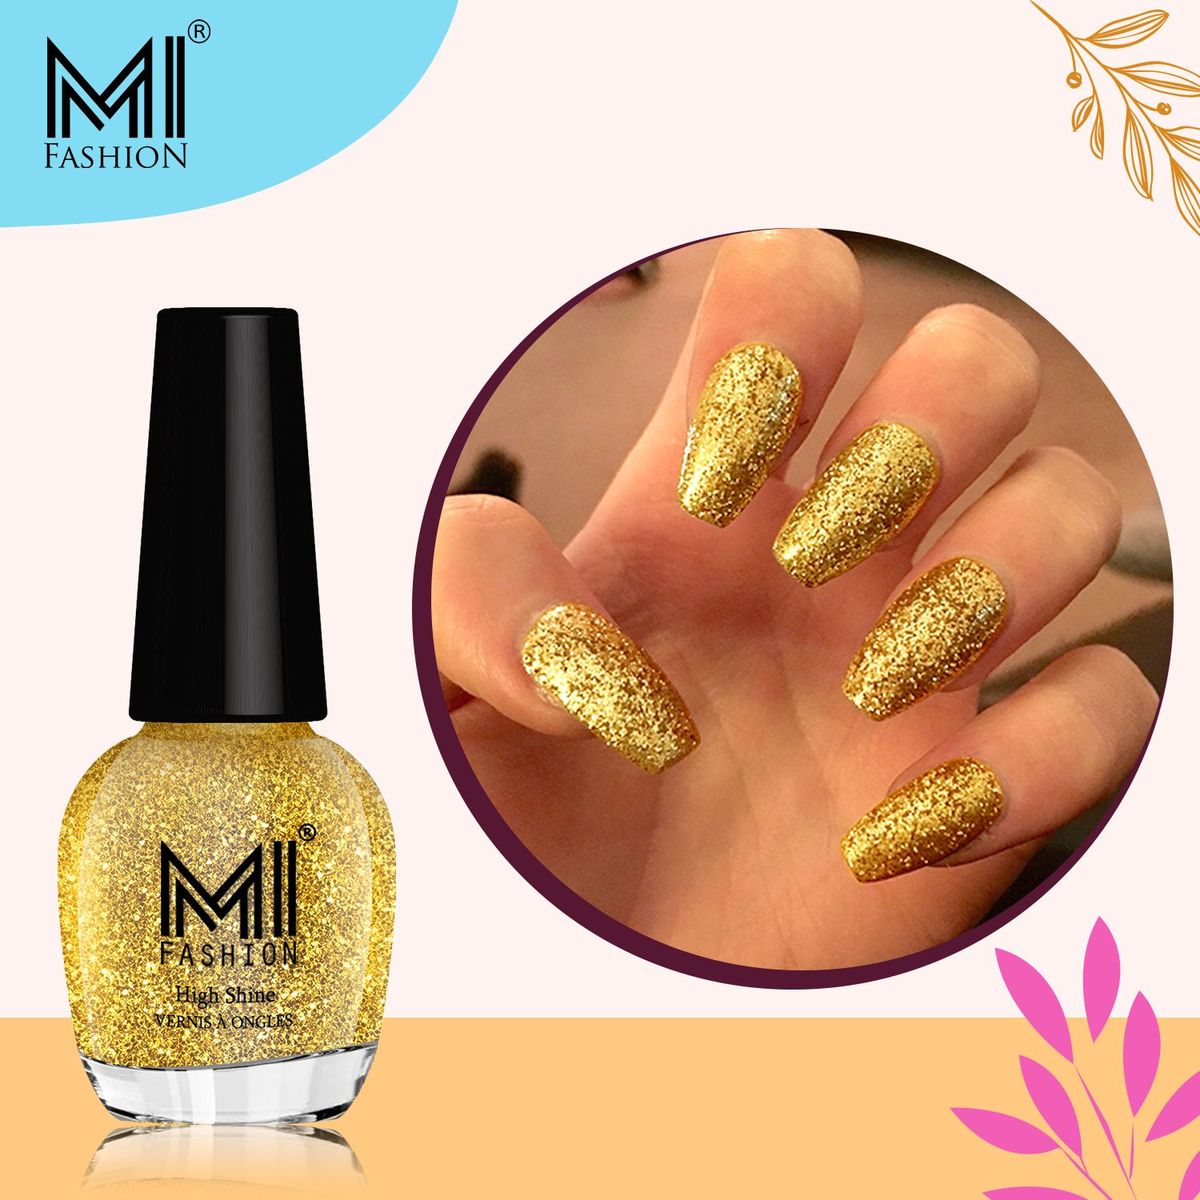 Buy lakyou beauty mirror nail polish 5ml (gold) Online at Low Prices in  India - Amazon.in